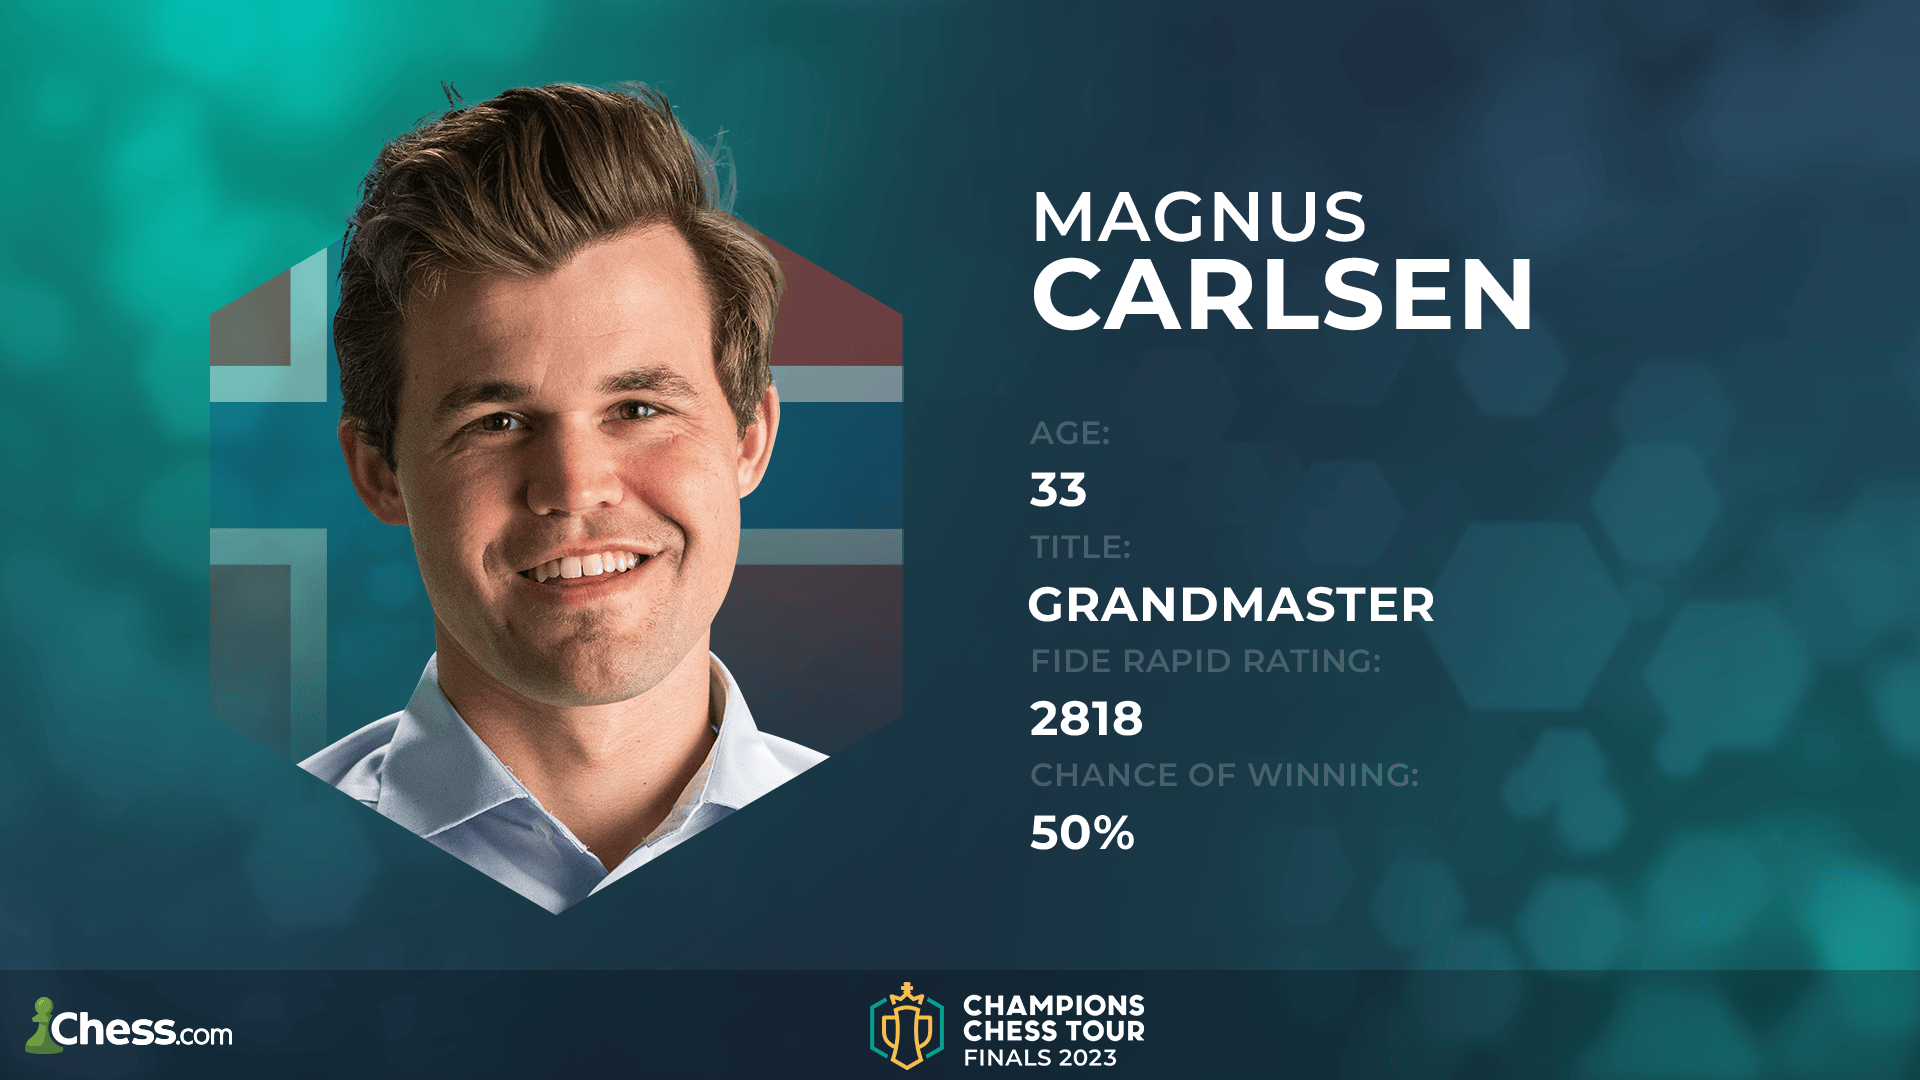 Carlsen Wins 3rd Title At 2023 Champions Chess Tour Finals 